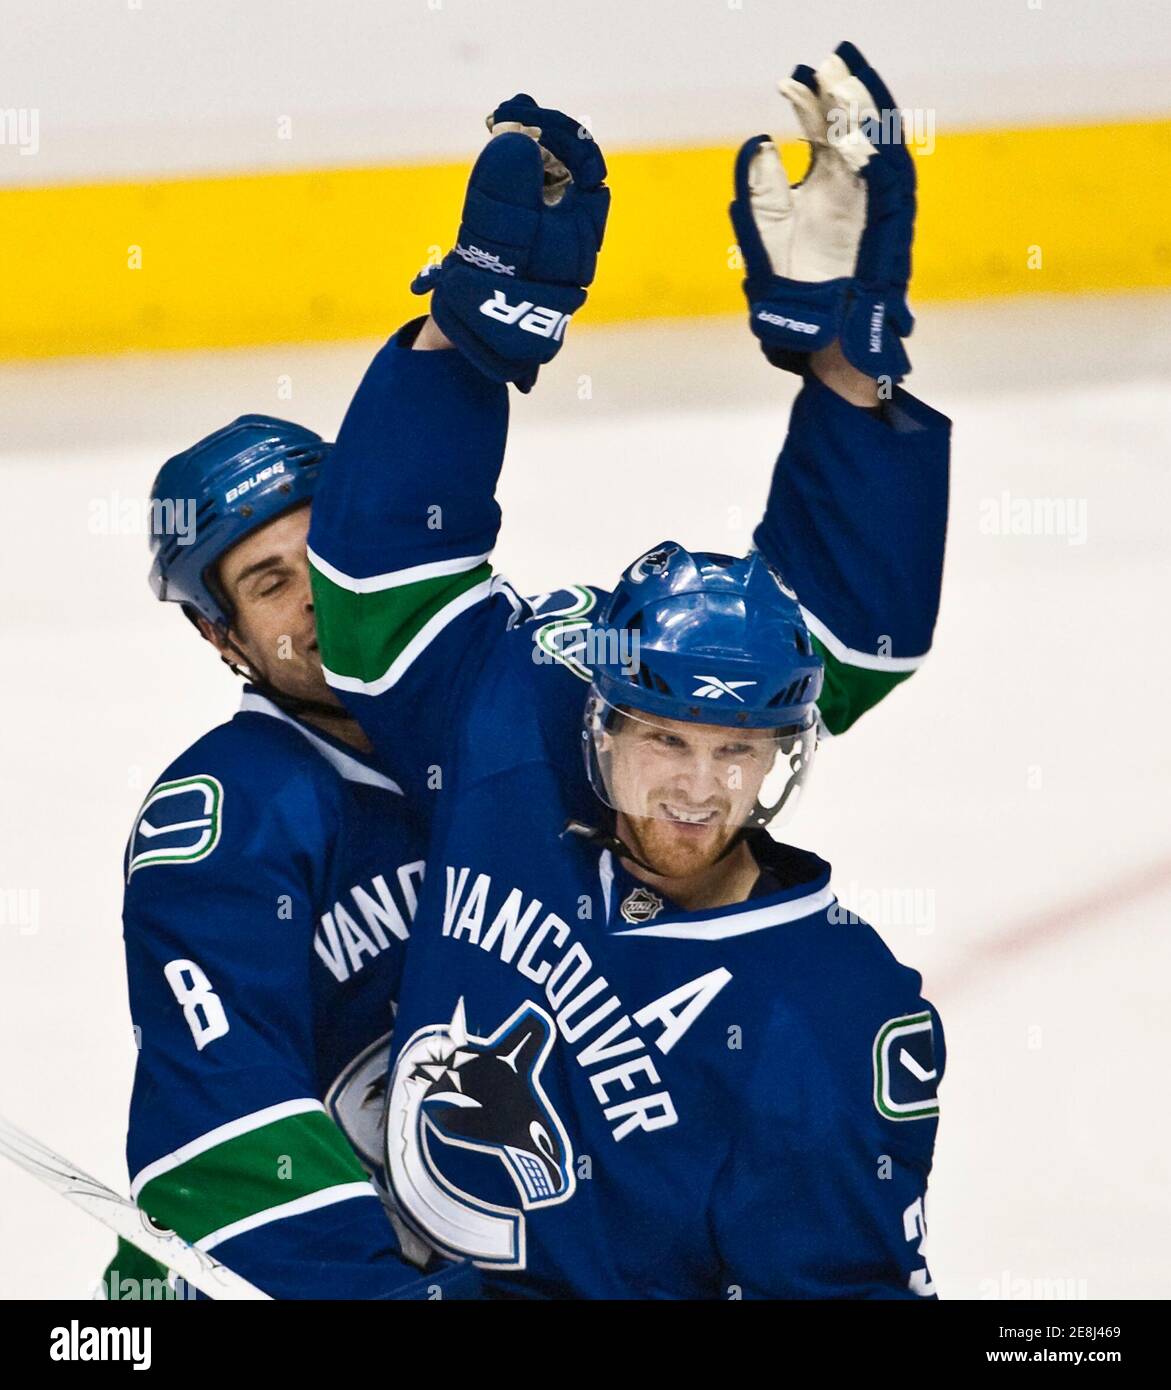 Vancouver Canucks Henrik Sedin (R) catches team mate Willie Mitchell in the face while celebrating his goal against the Columbus Blue Jackets during the second period of their NHL hockey game in Vancouver, British Columbia, January 5, 2010.         REUTERS/Andy Clark     (CANADA - Tags: SPORT ICE HOCKEY) Stock Photo